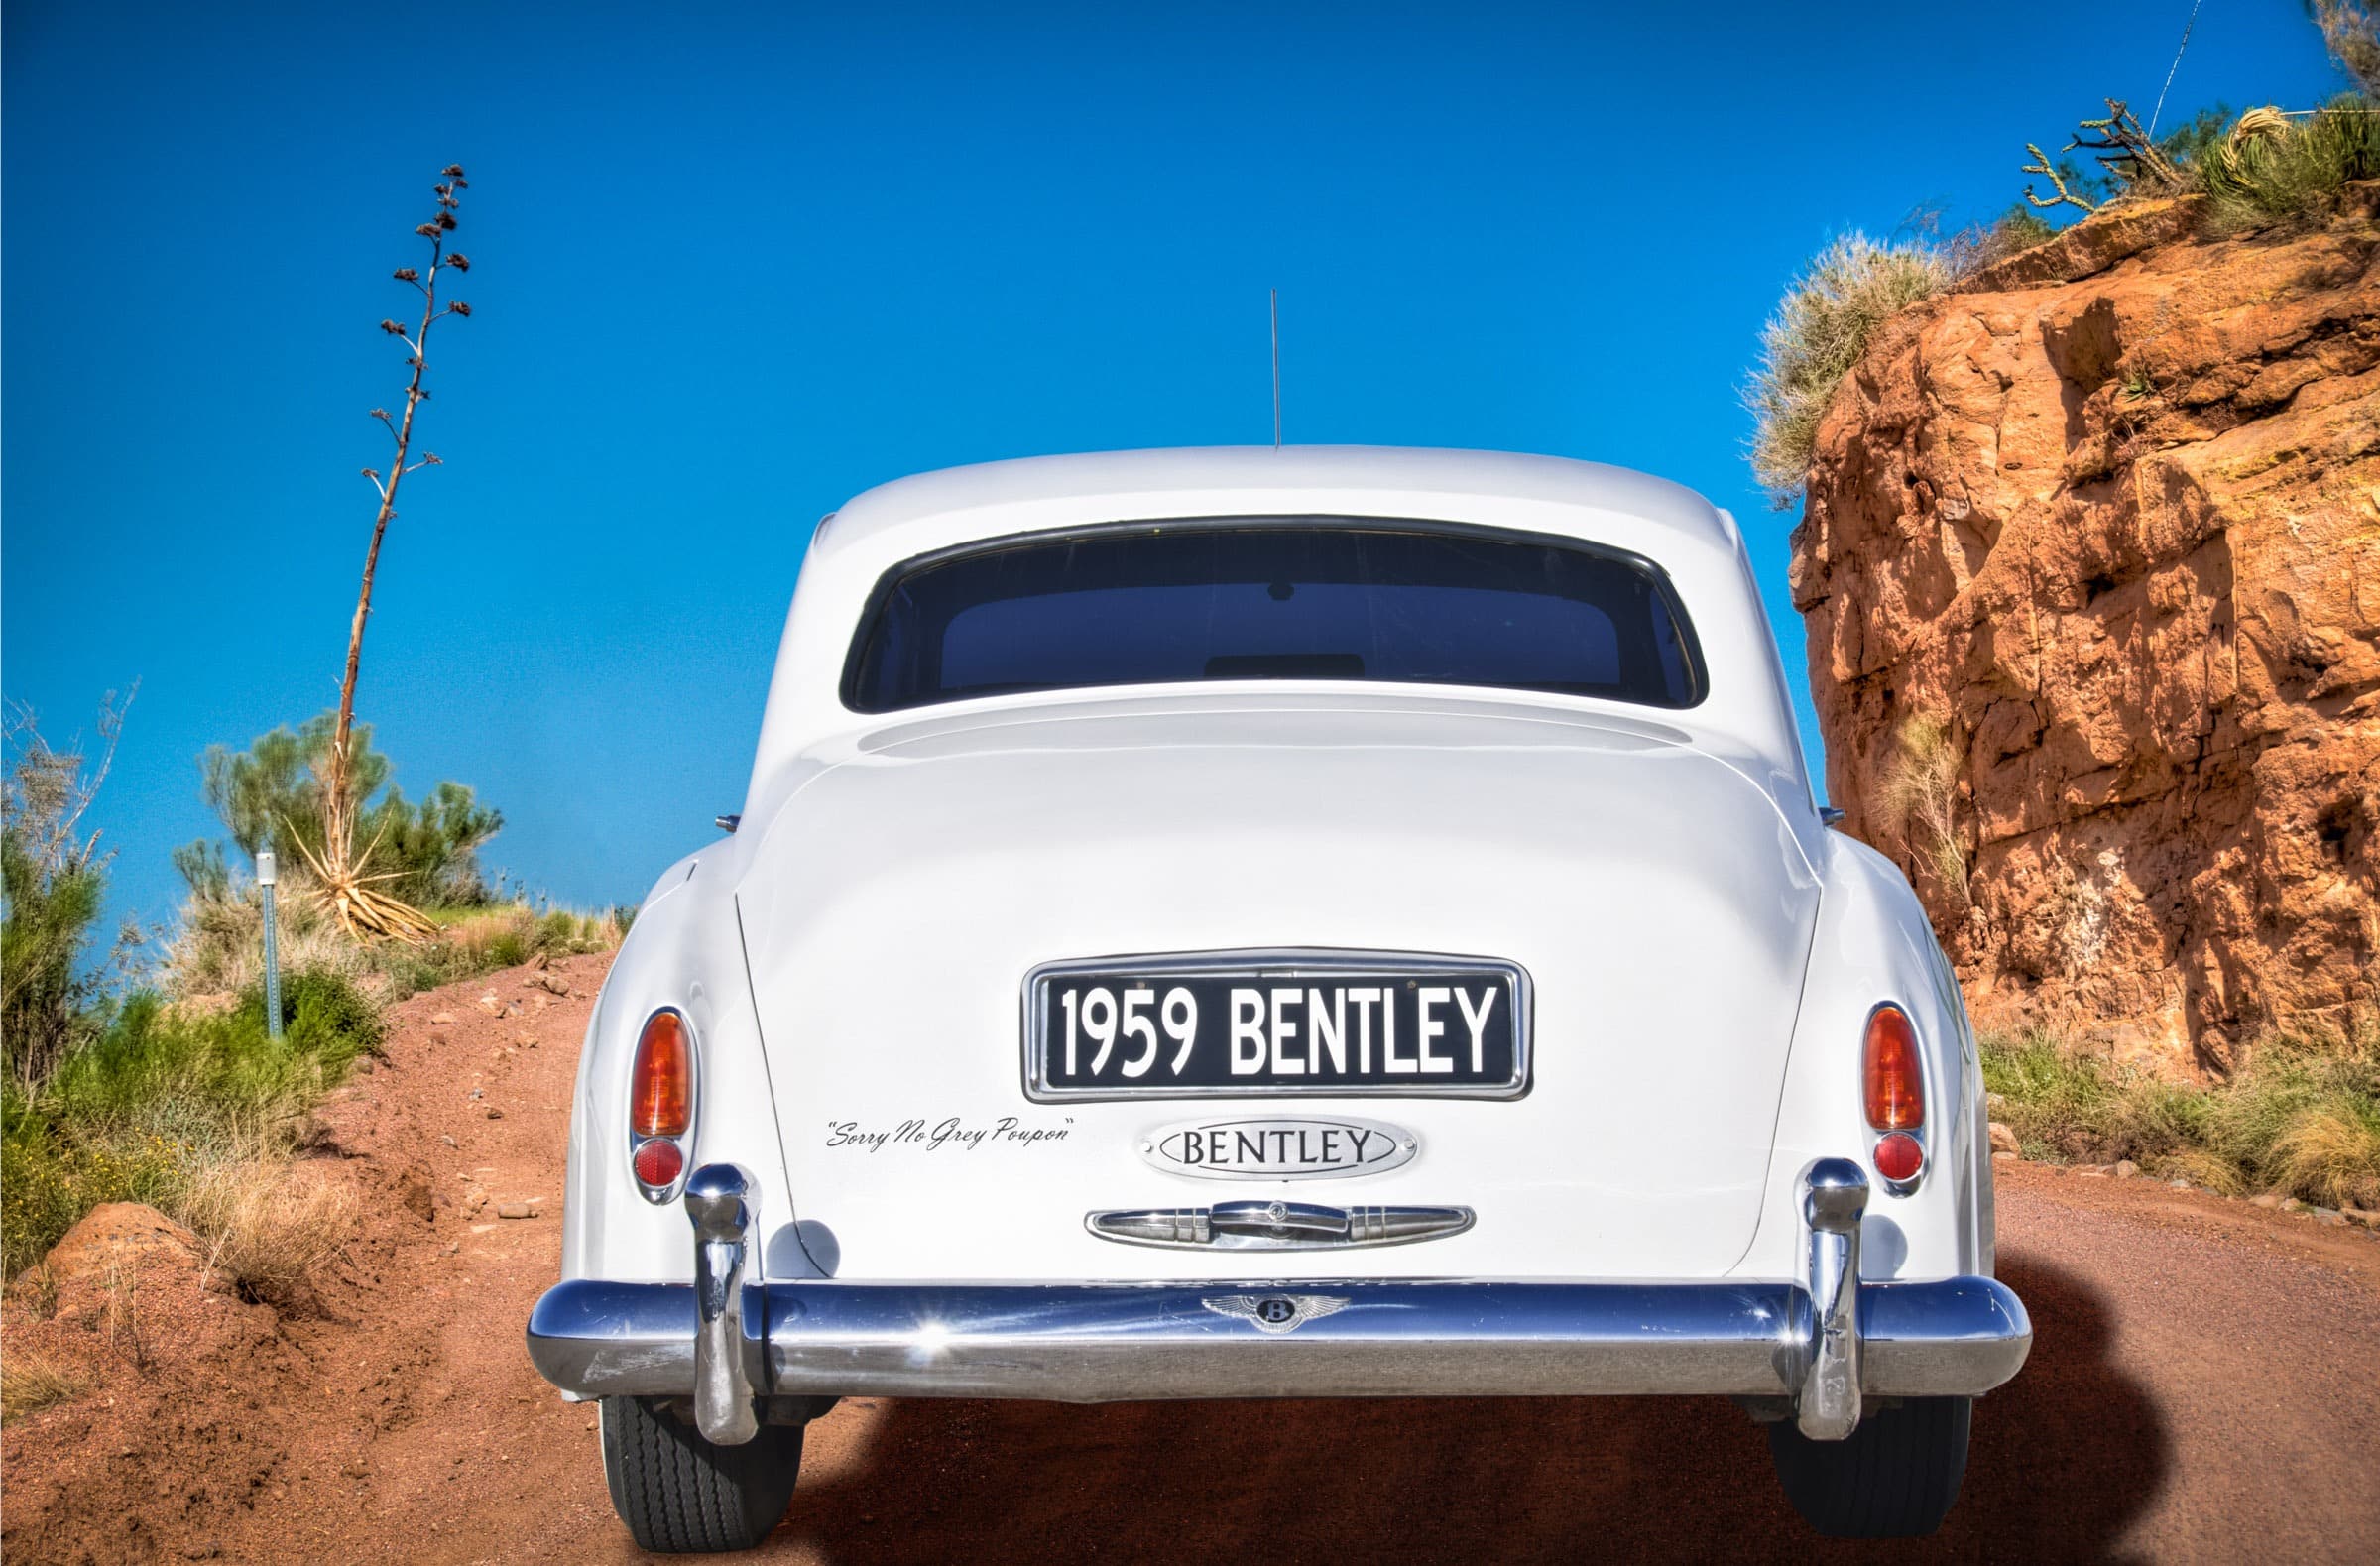 1959 Bentley S1 rear view on a dirt road in Arizona.